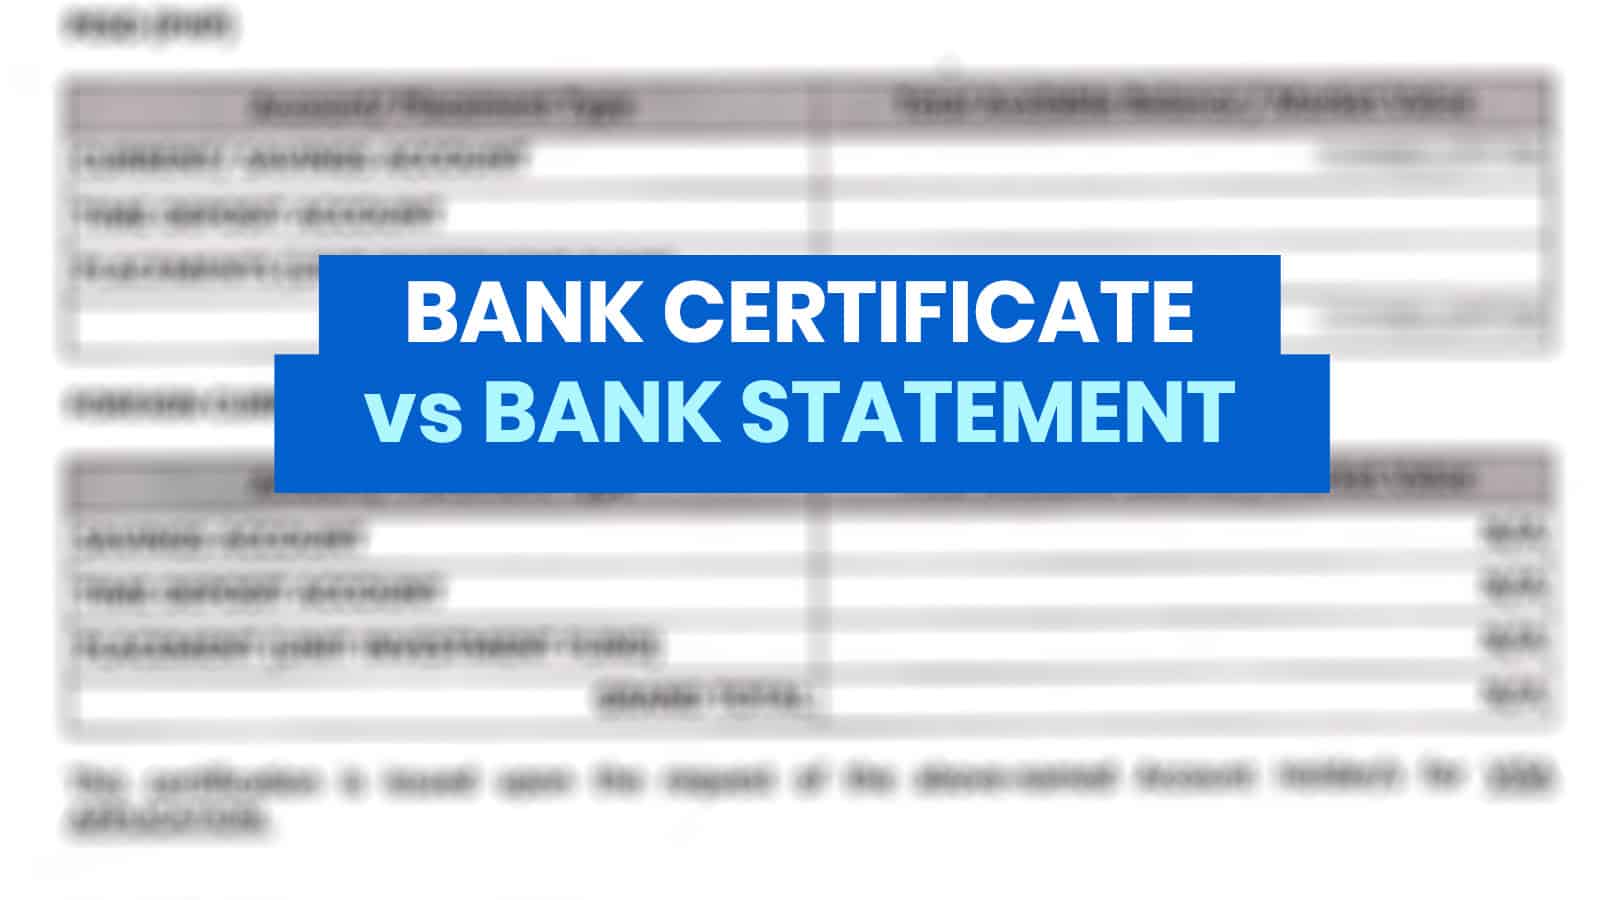 BANK CERTIFICATE vs BANK STATEMENT: What’s the Difference? Which is Needed for Visa Application?